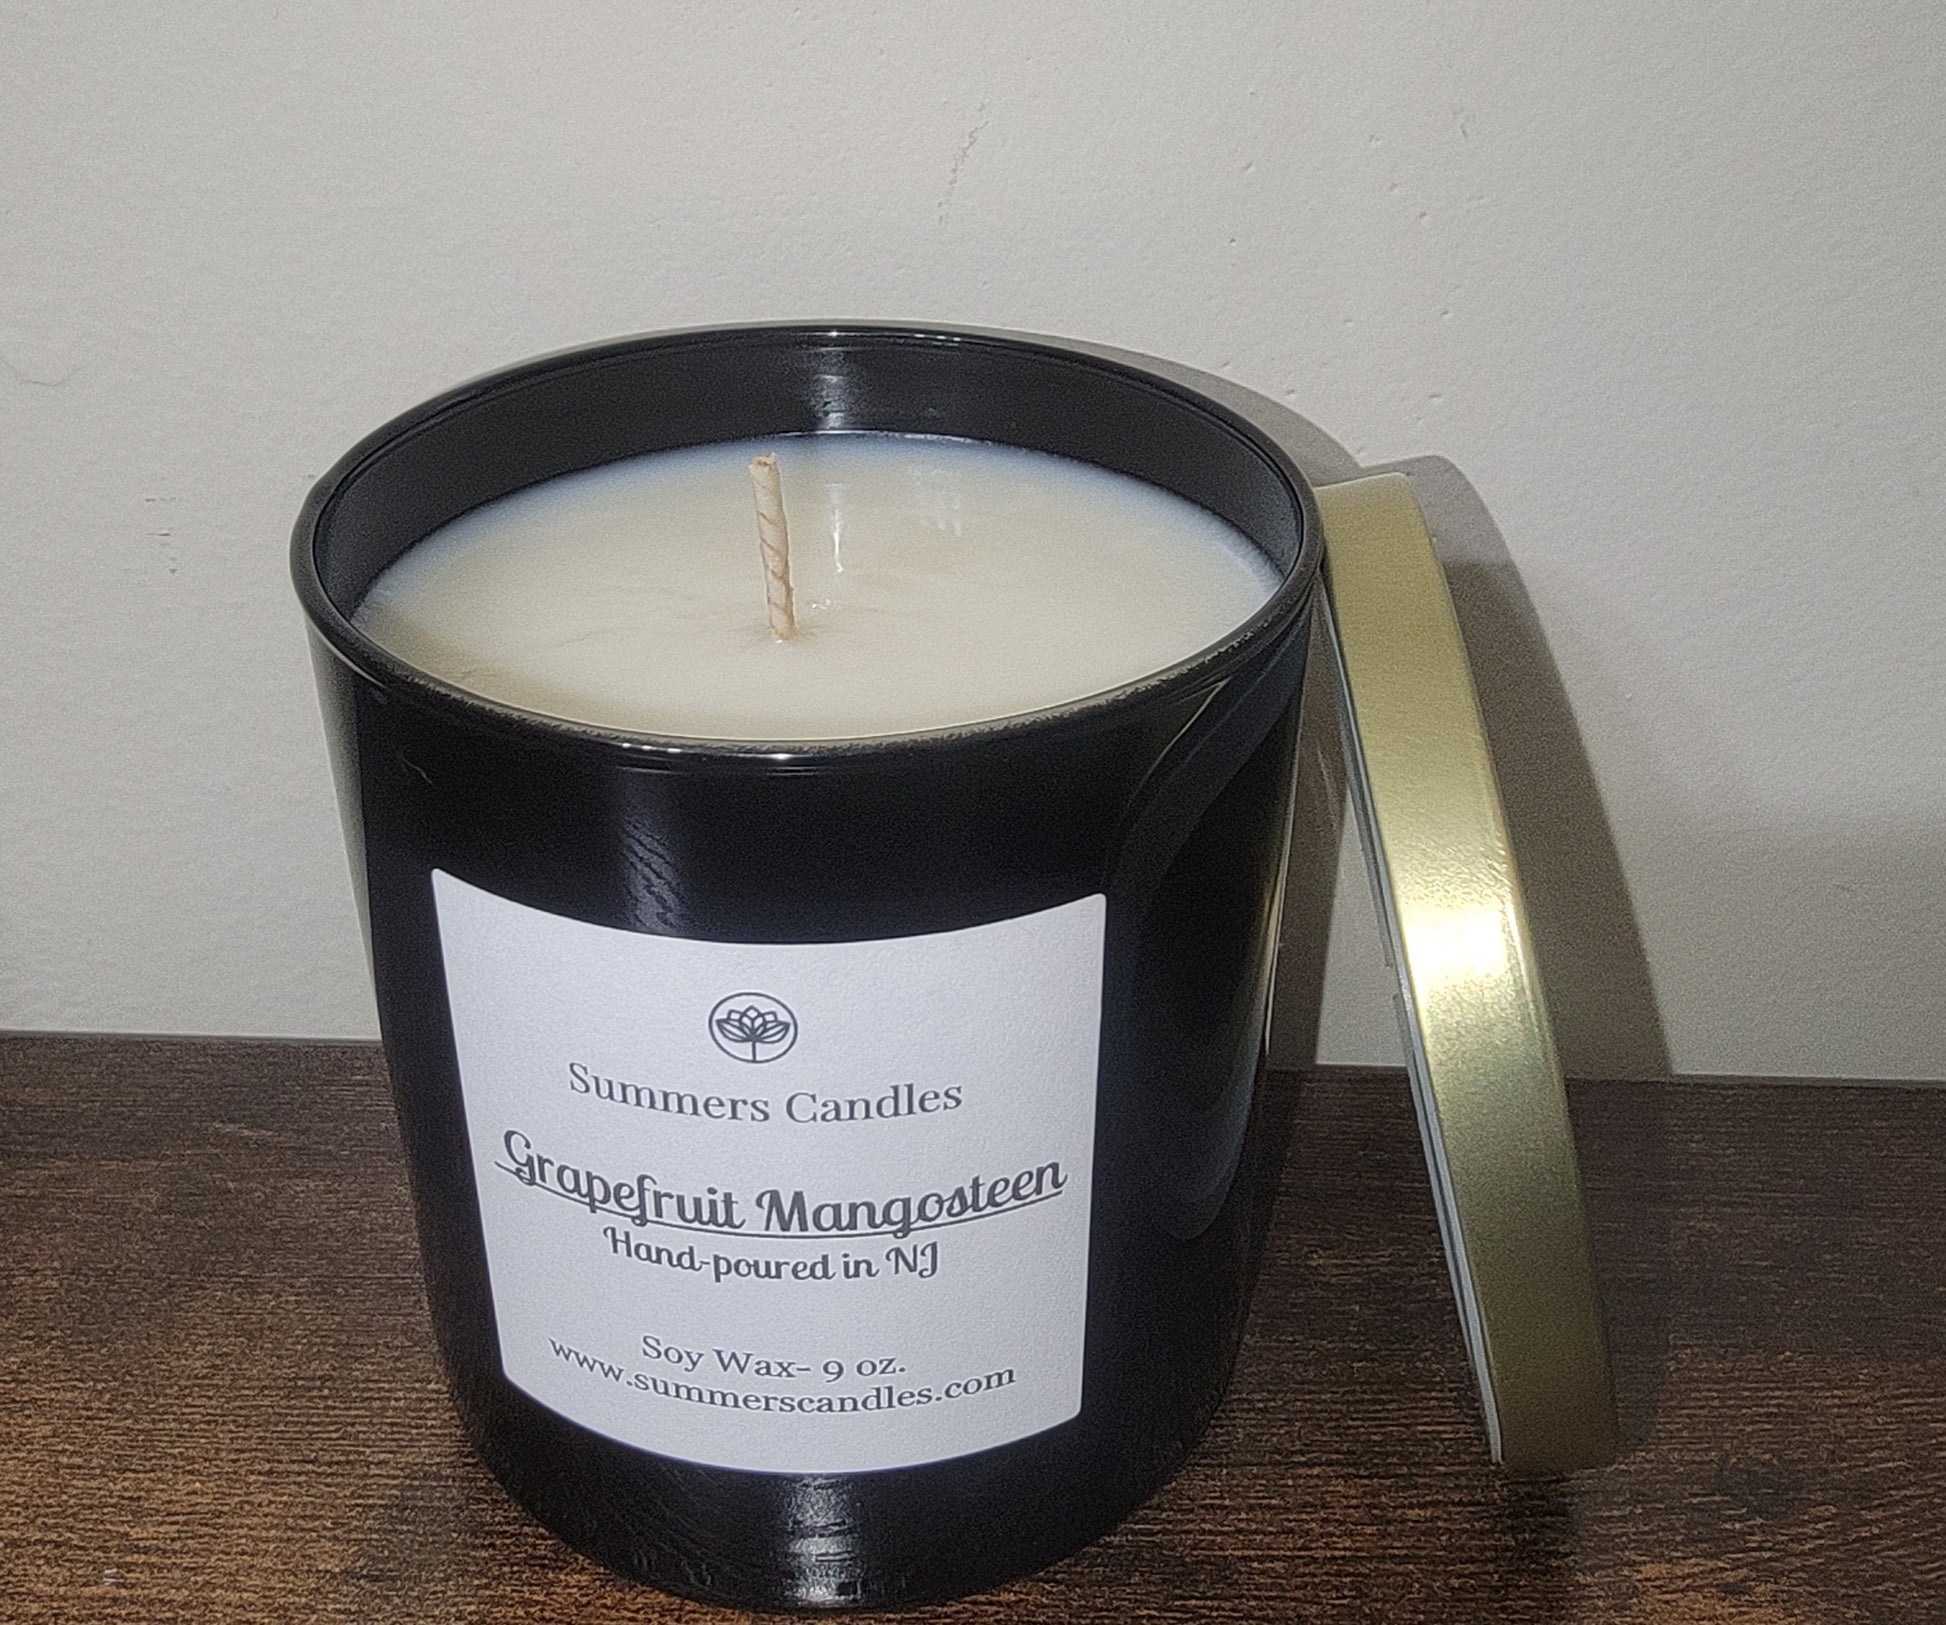 Grapefruit Mangosteen Scented Candle